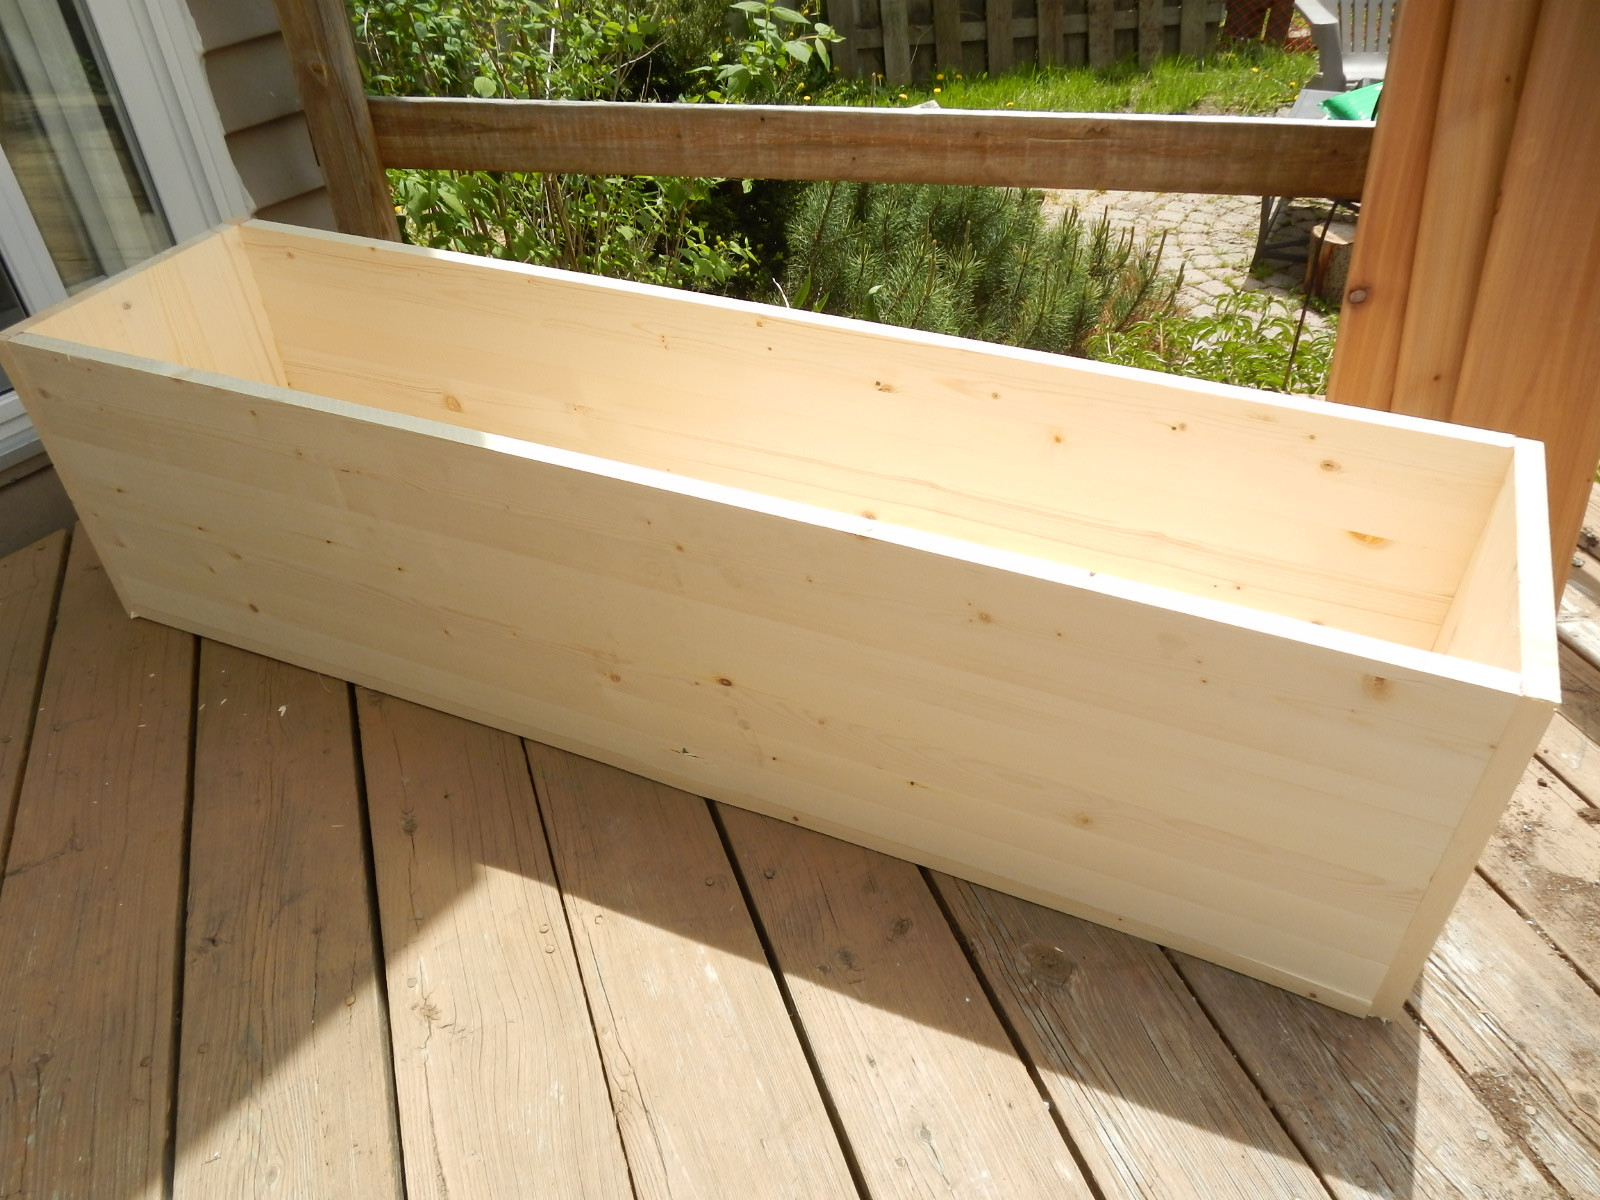 DIY Wood Planter Boxes
 Planting for Privacy – DIY Wood Planter